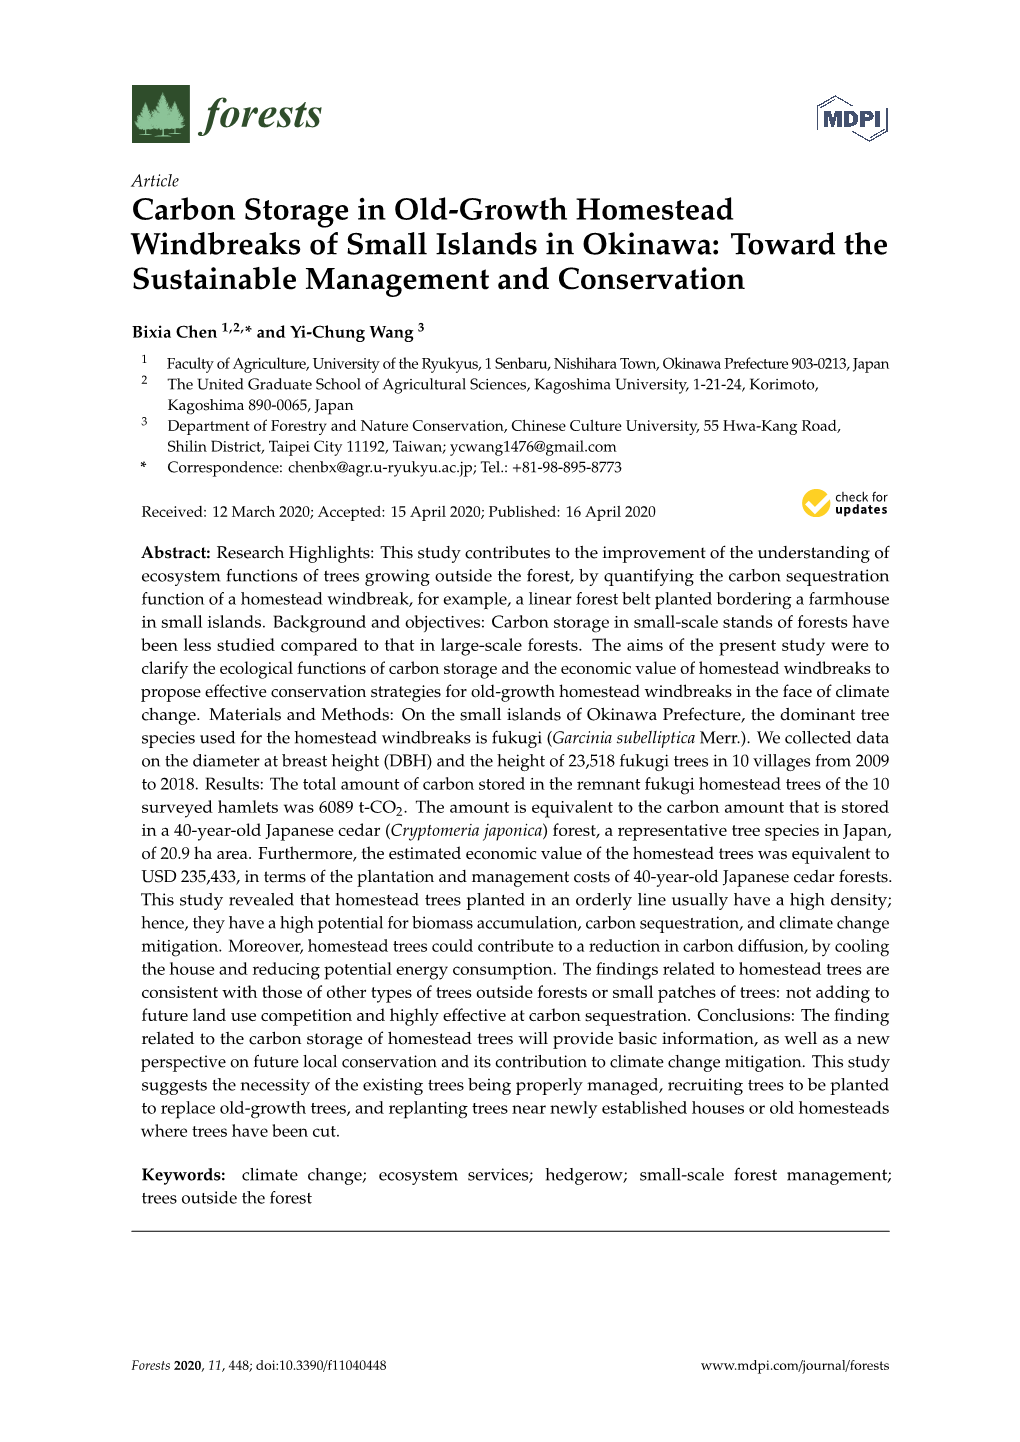 Carbon Storage in Old-Growth Homestead Windbreaks of Small Islands in Okinawa: Toward the Sustainable Management and Conservation